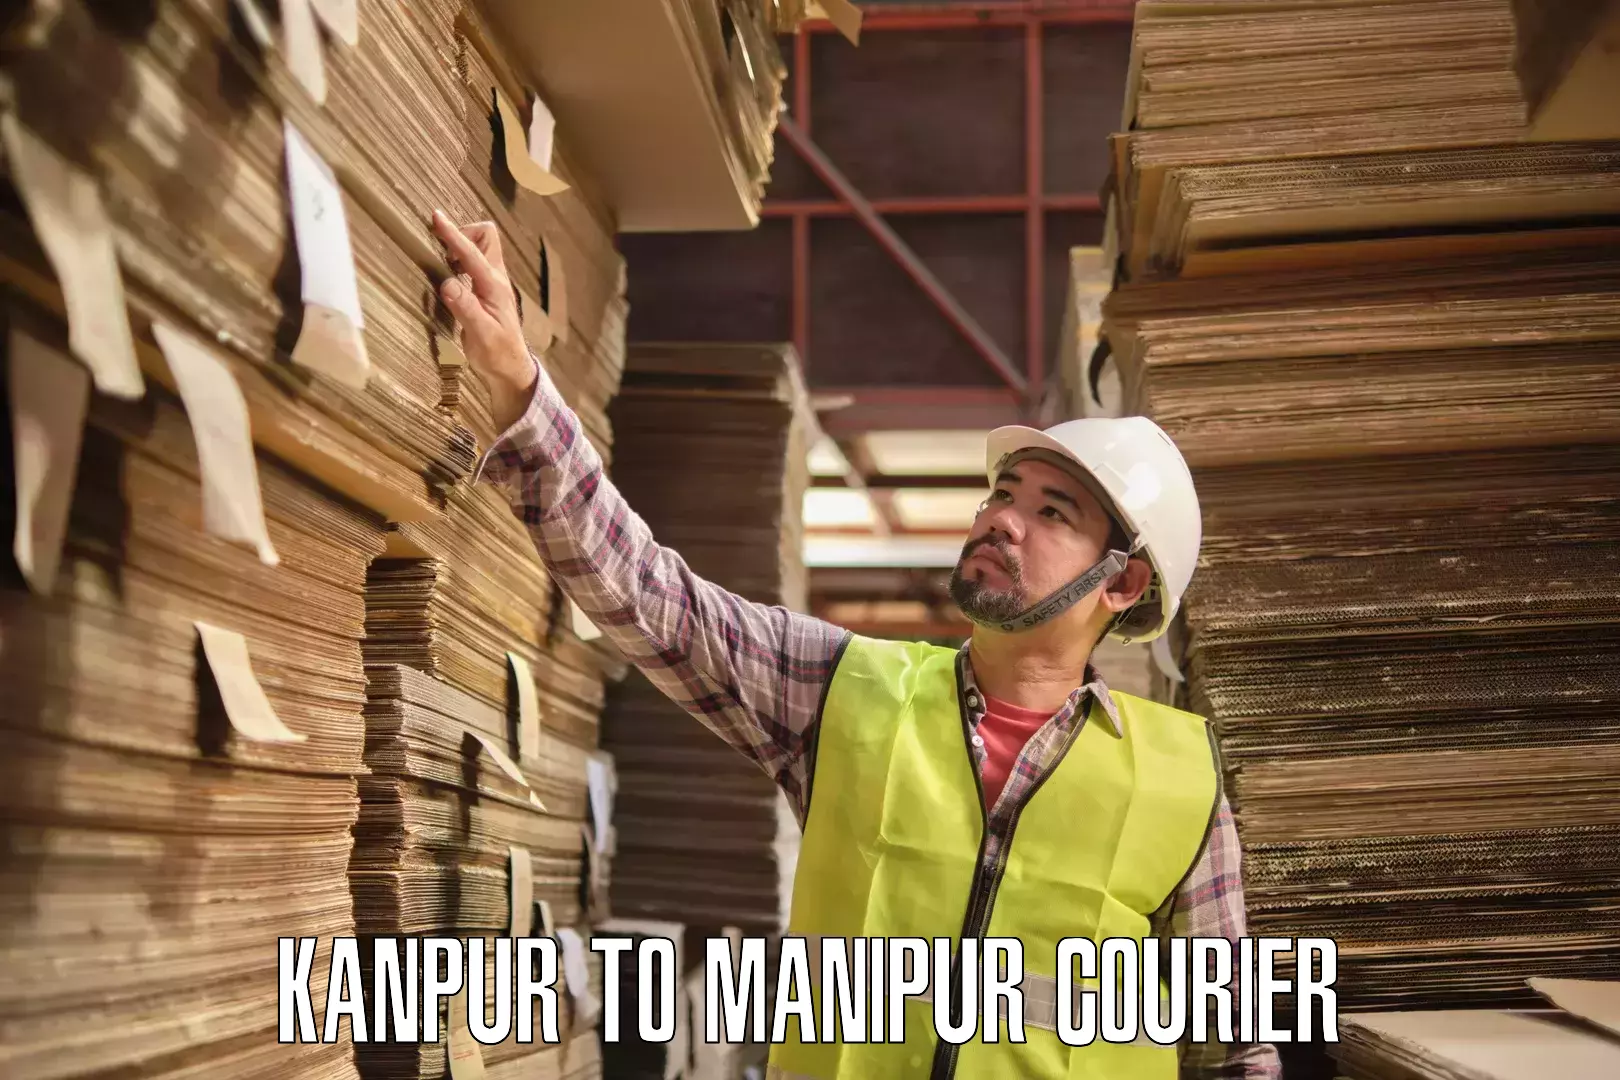 Nationwide delivery network Kanpur to Manipur